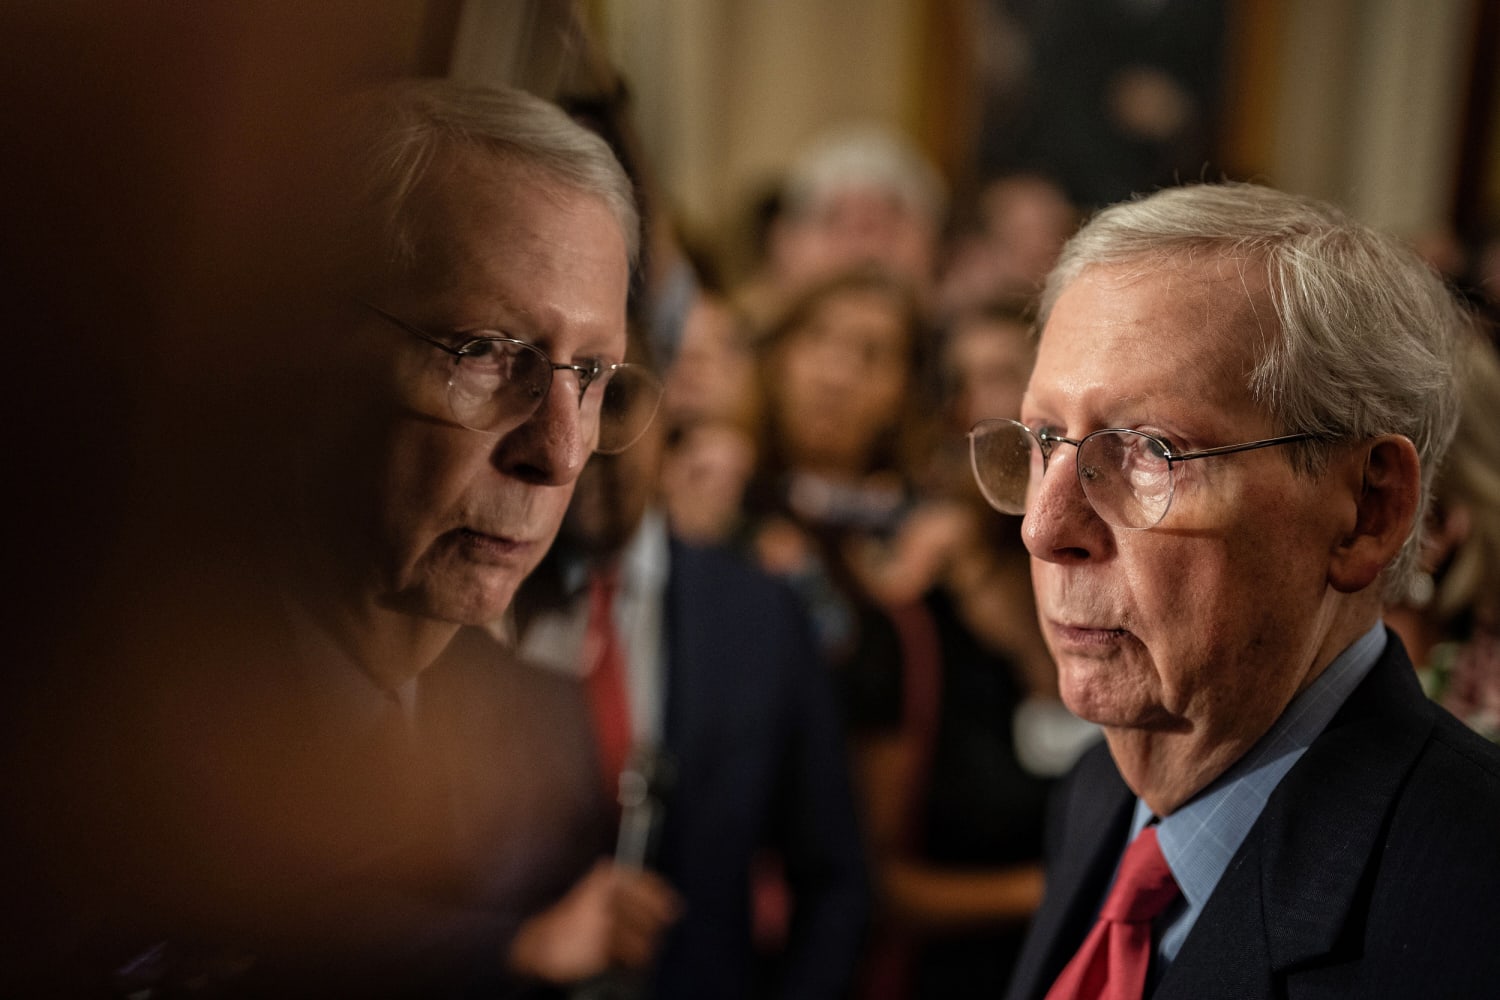 Facing health questions, Mitch McConnell vows to finish his term ending in 2027